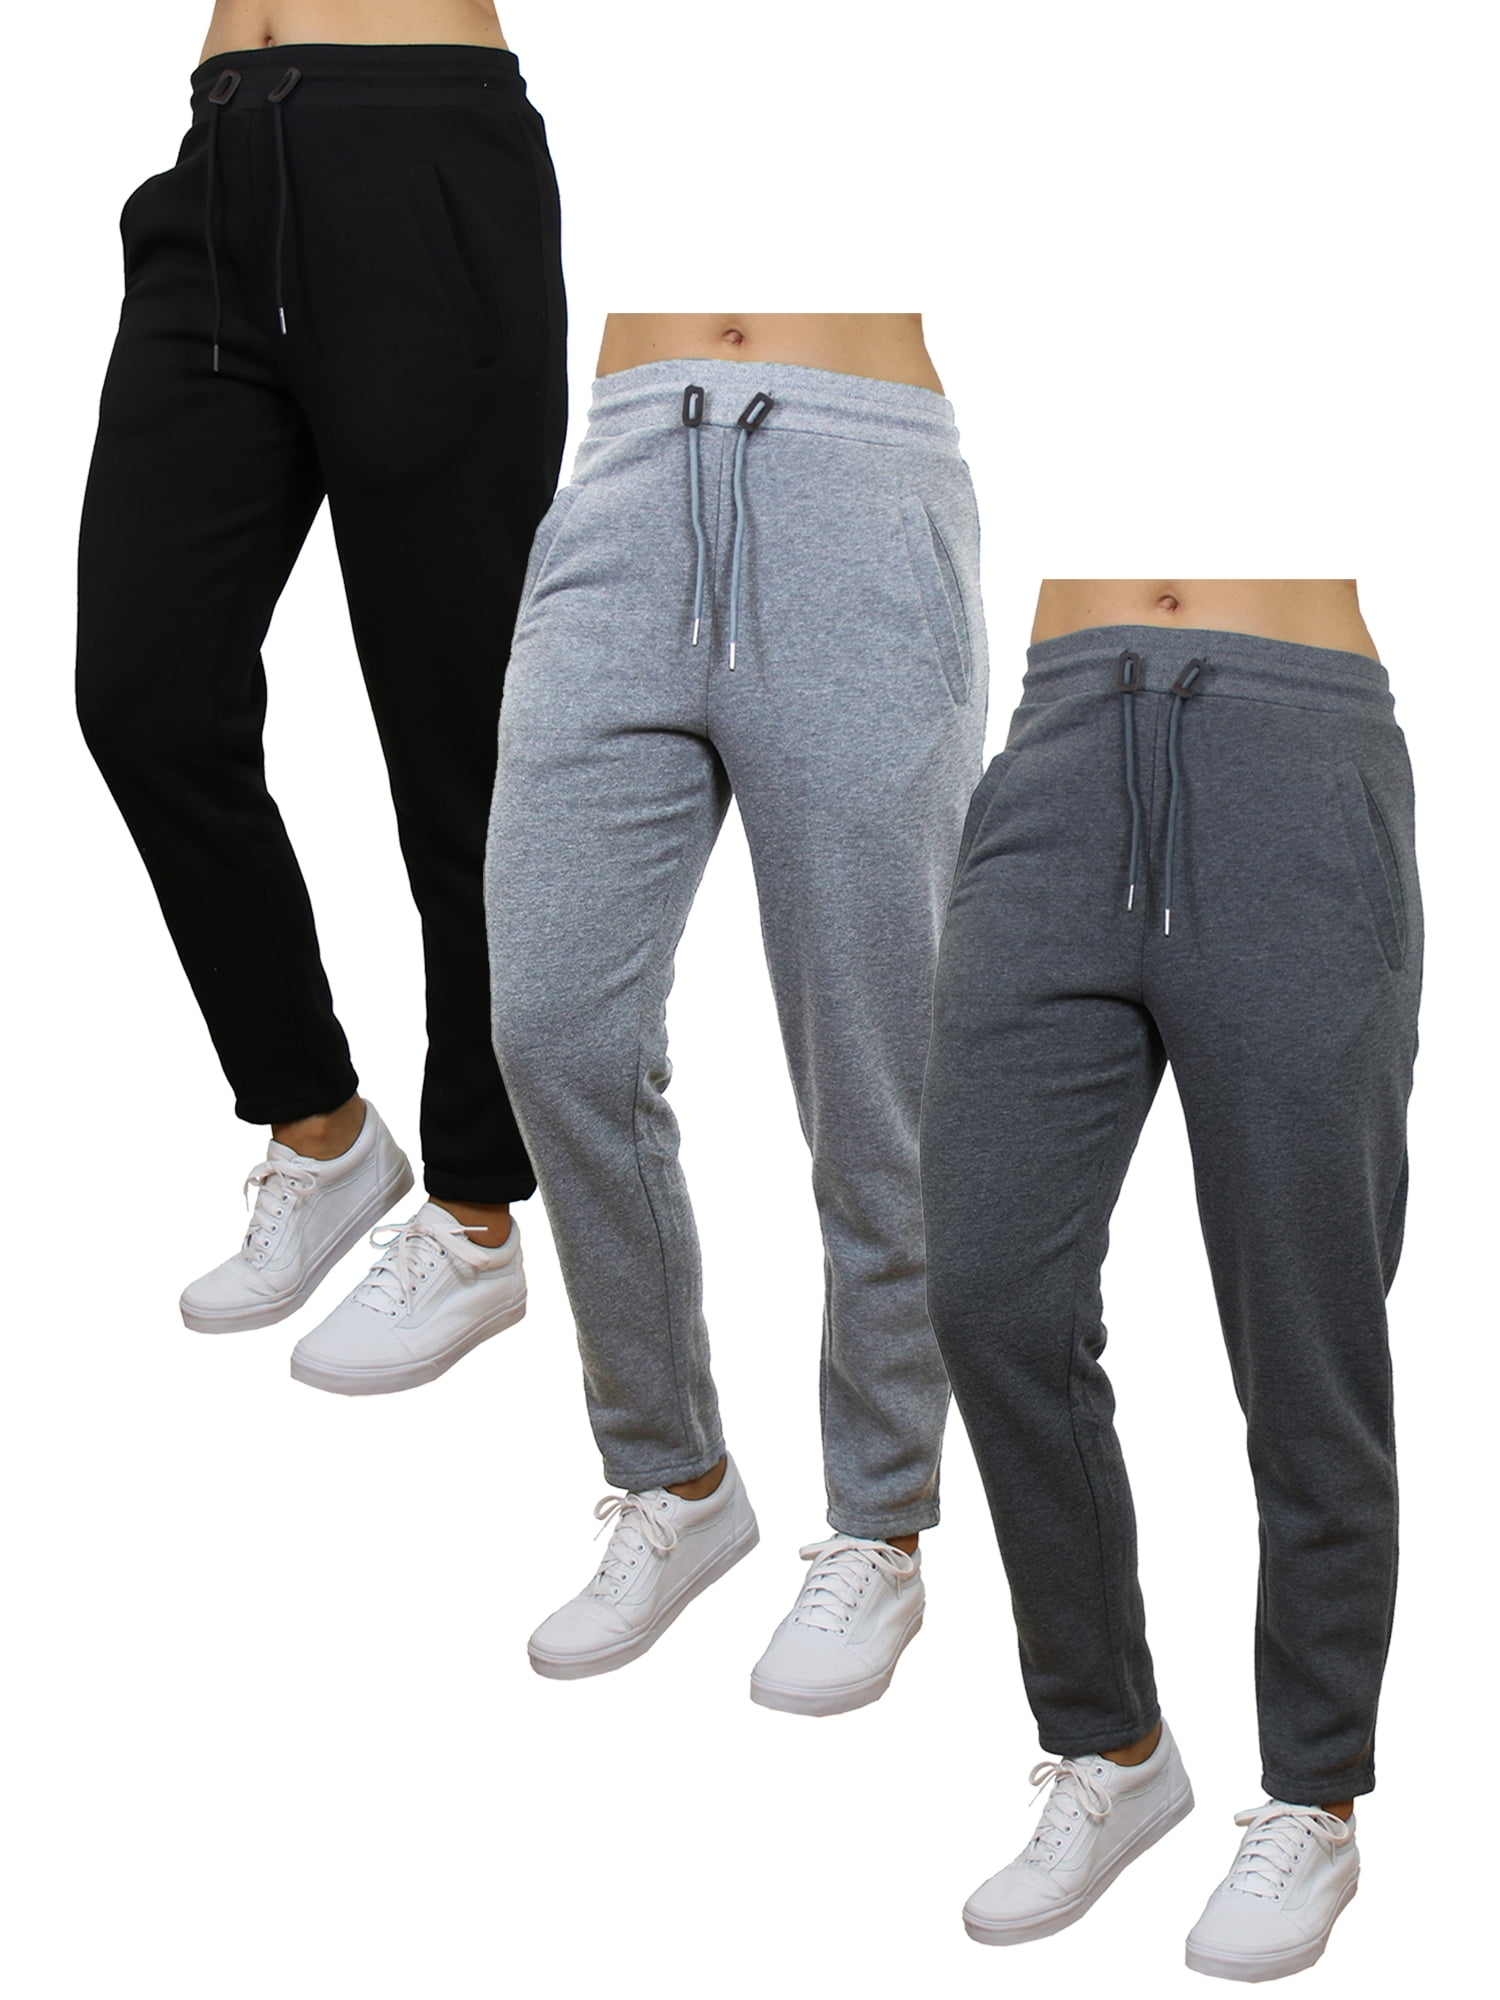 Galaxy by Harvic 3-Pack Women's Loose Fit Fleece Jogger Sweatpants (S ...